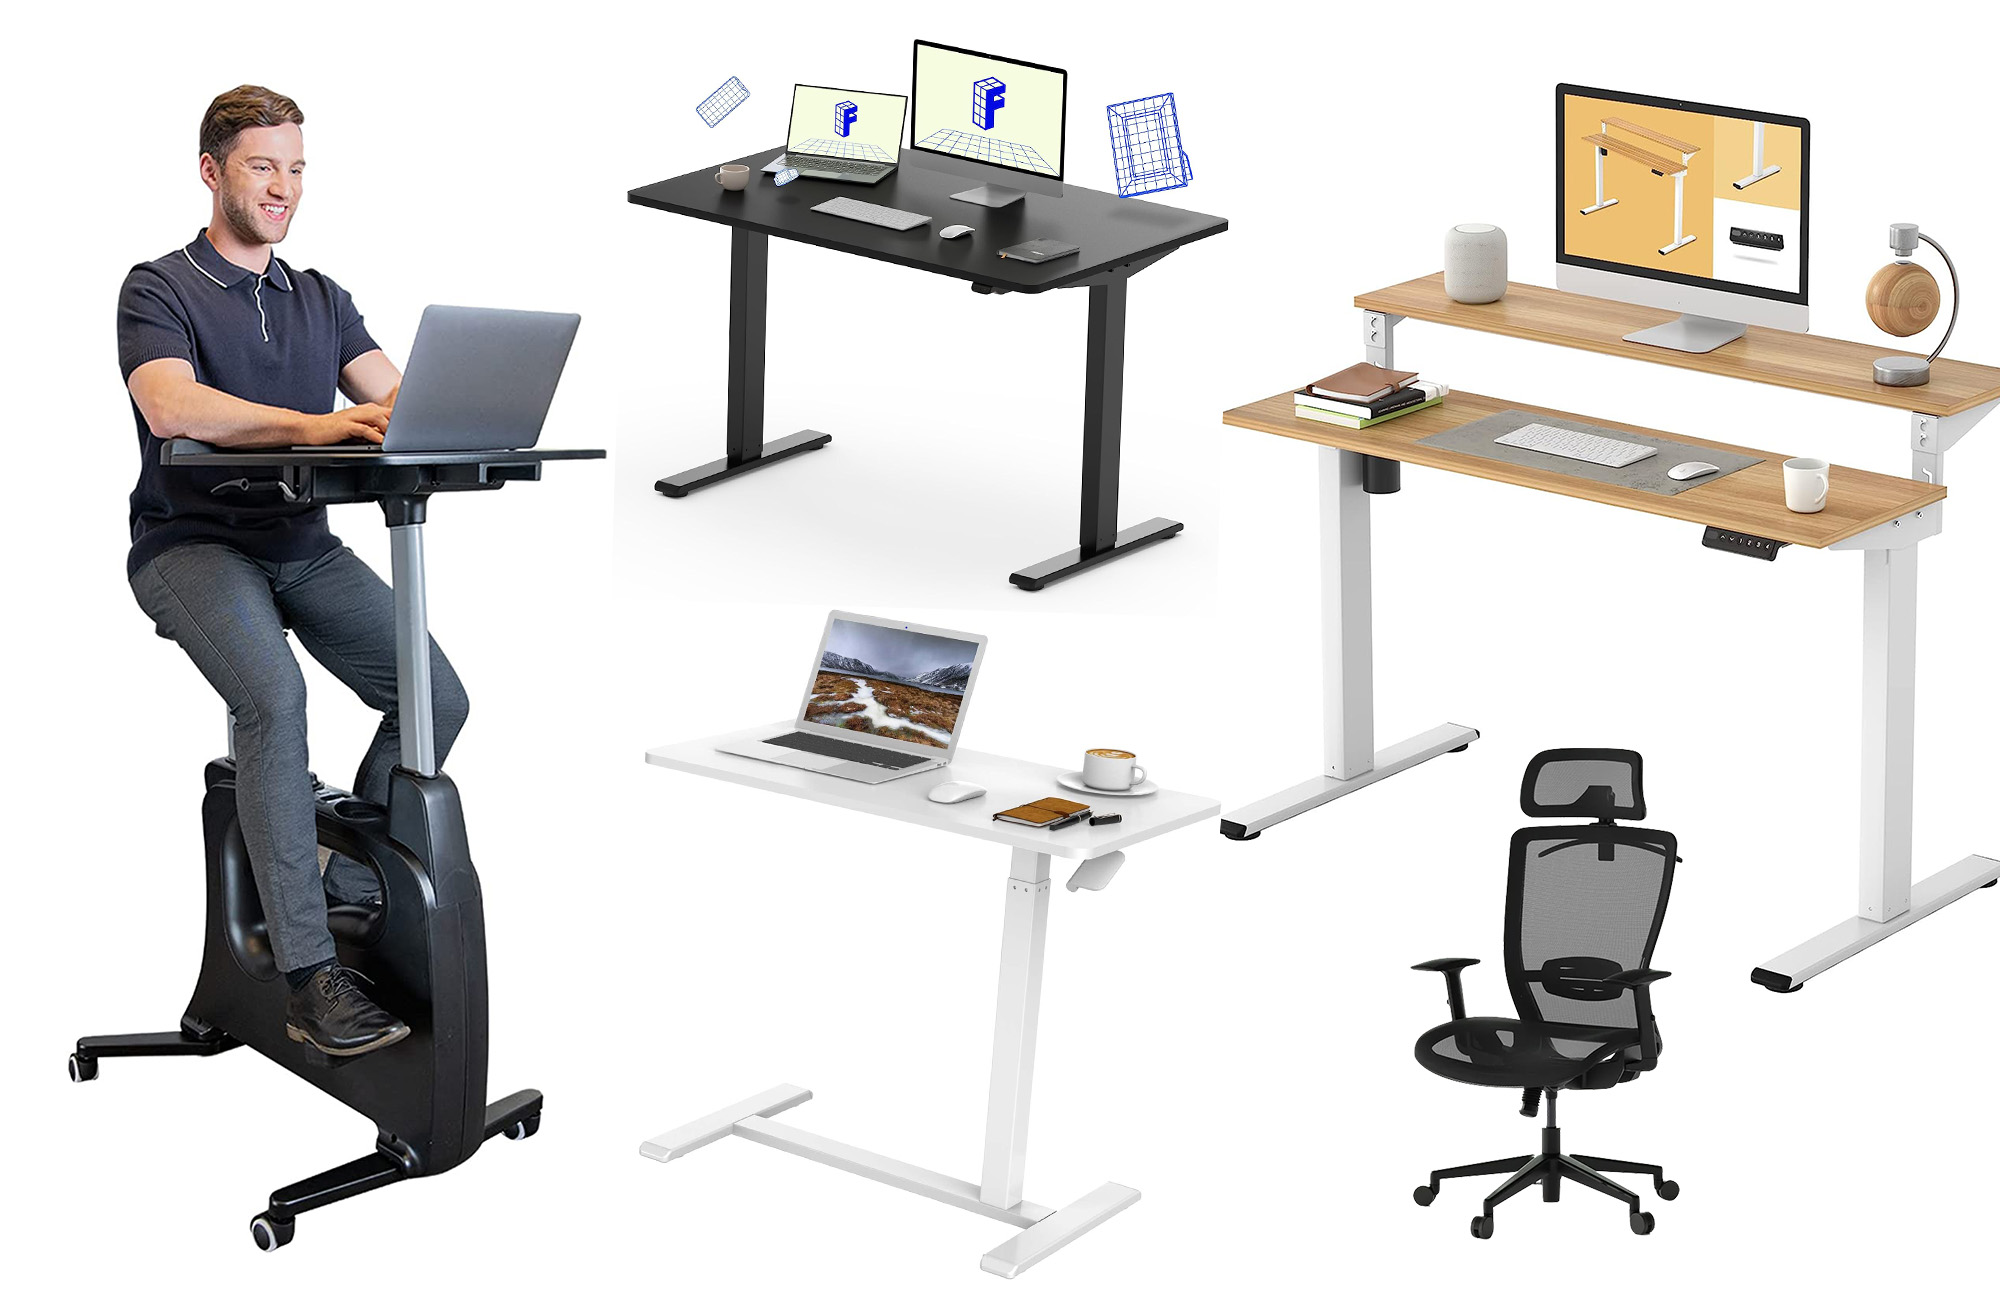 Don’t sit on these last-minute standing desk deals from Flexispot this Prime Day